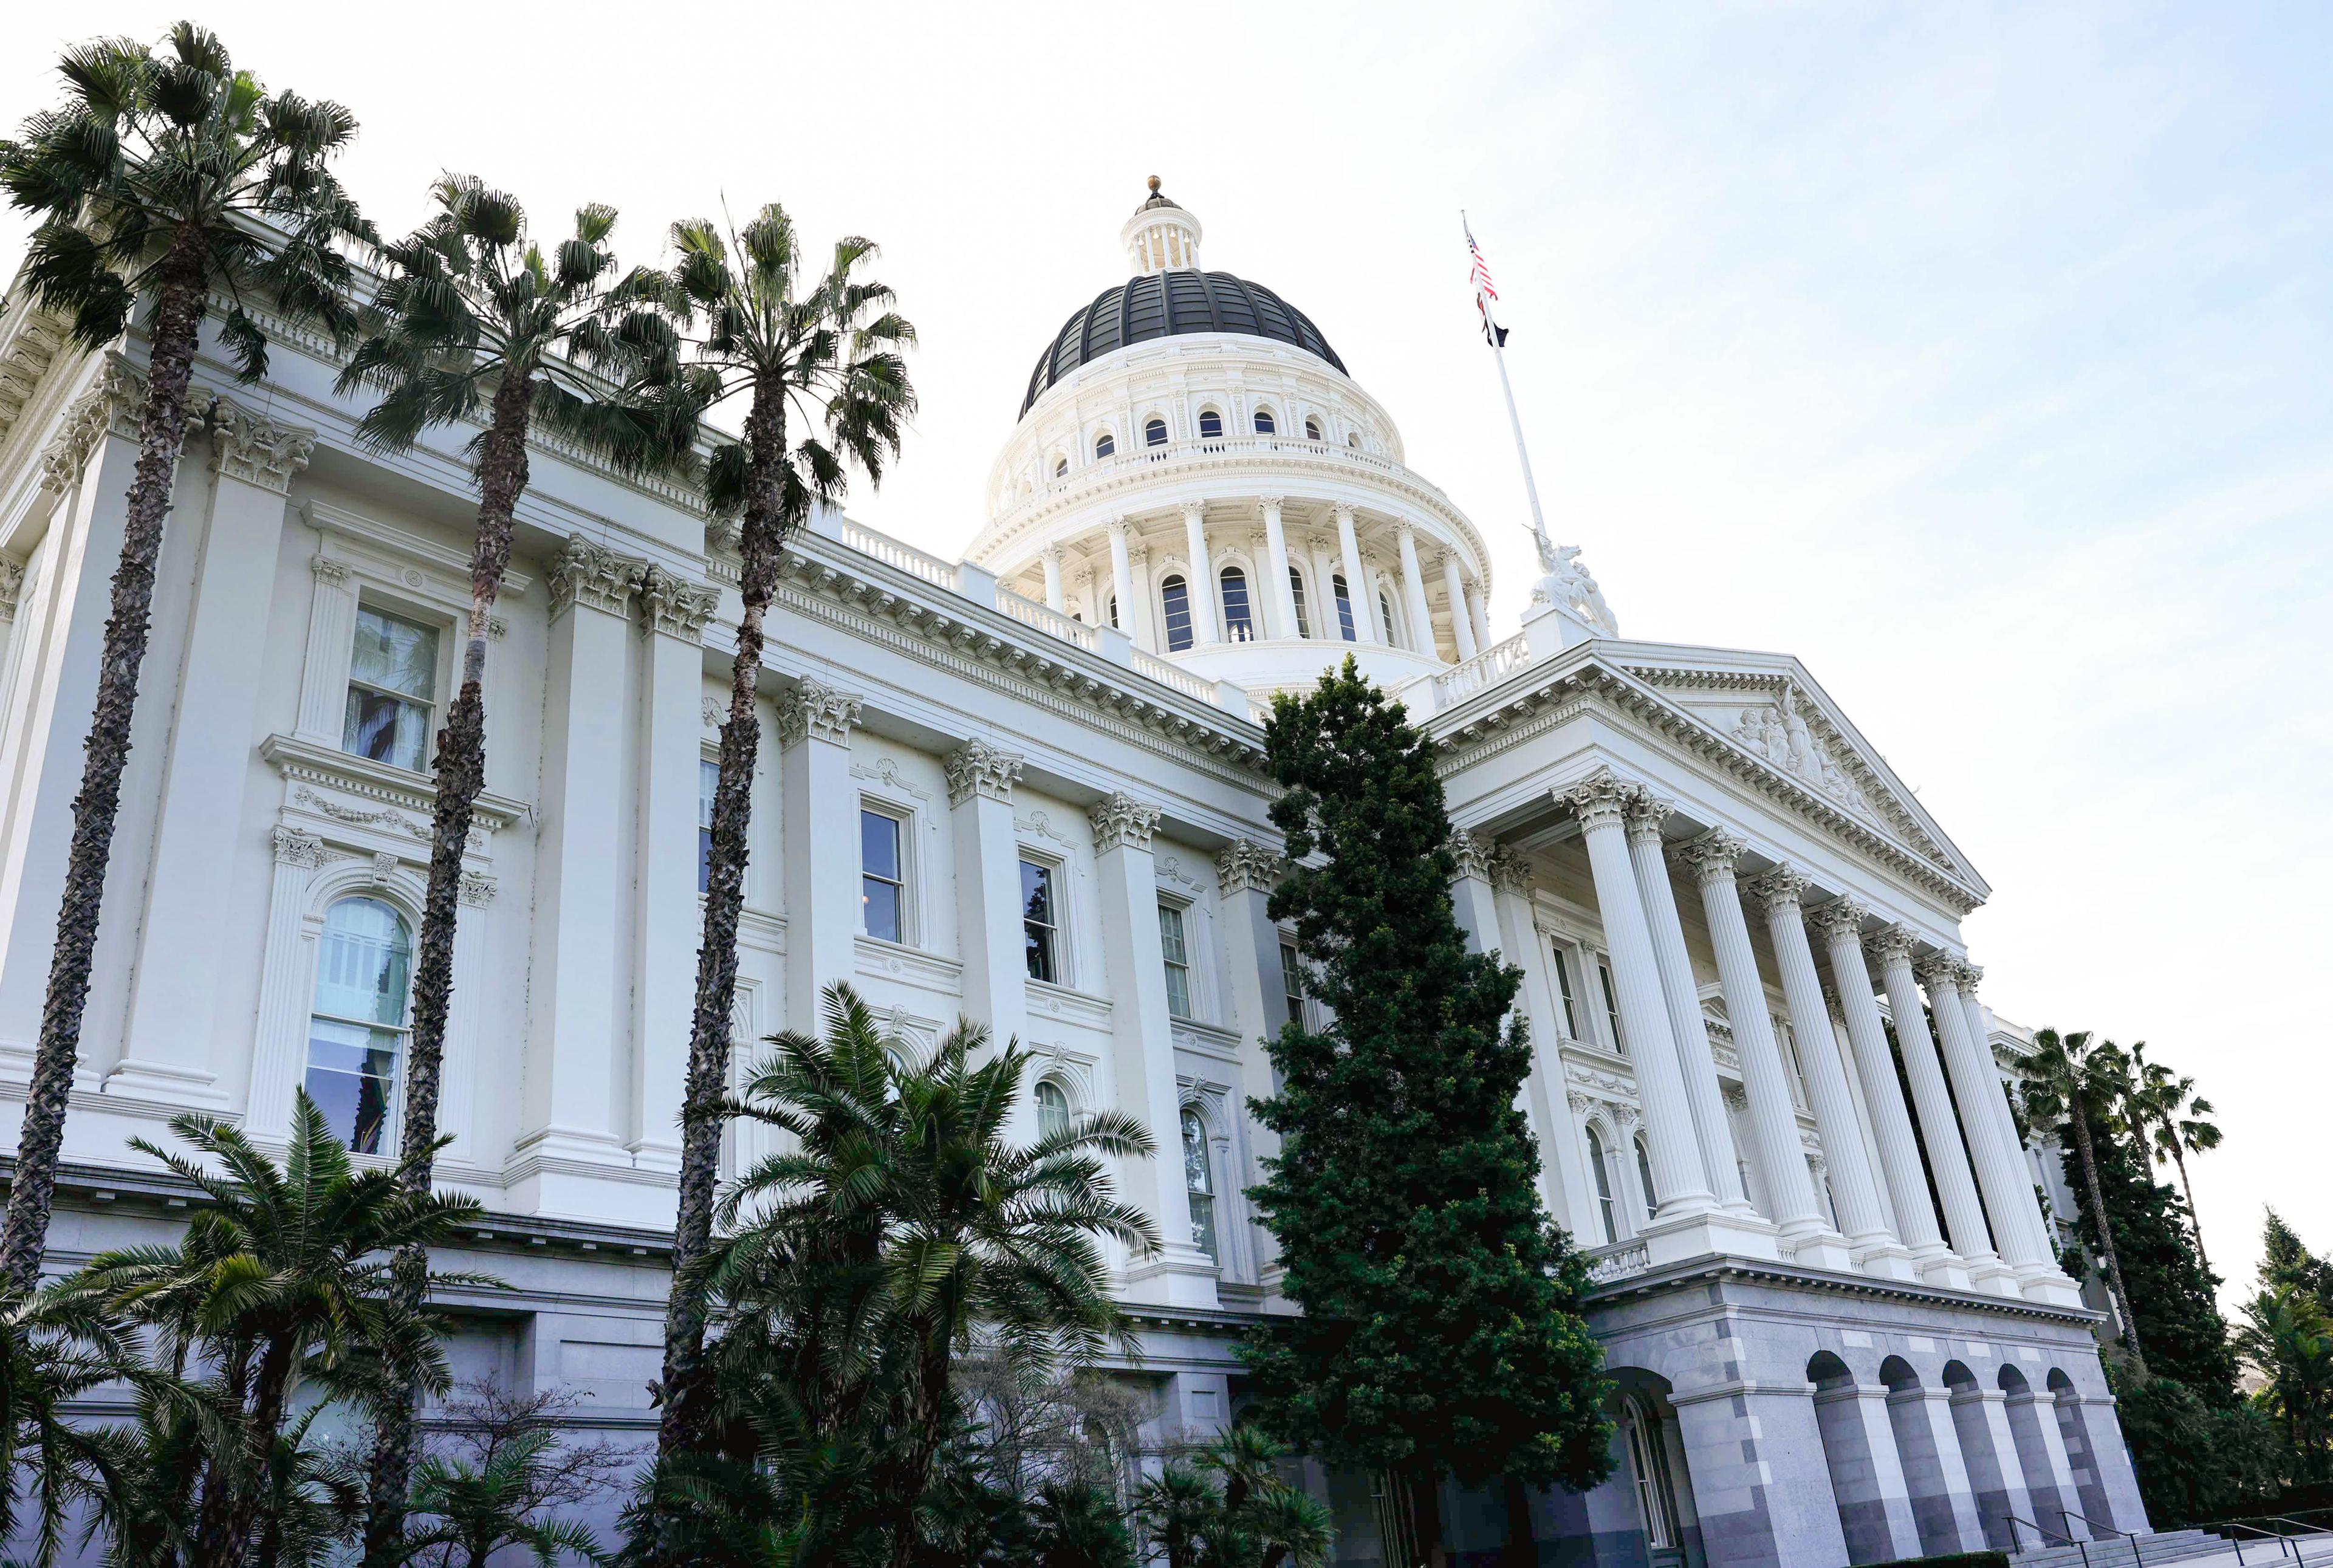 California Legislative Analyst’s Office Warns Governor’s Budget Plan Appears Unconstitutional